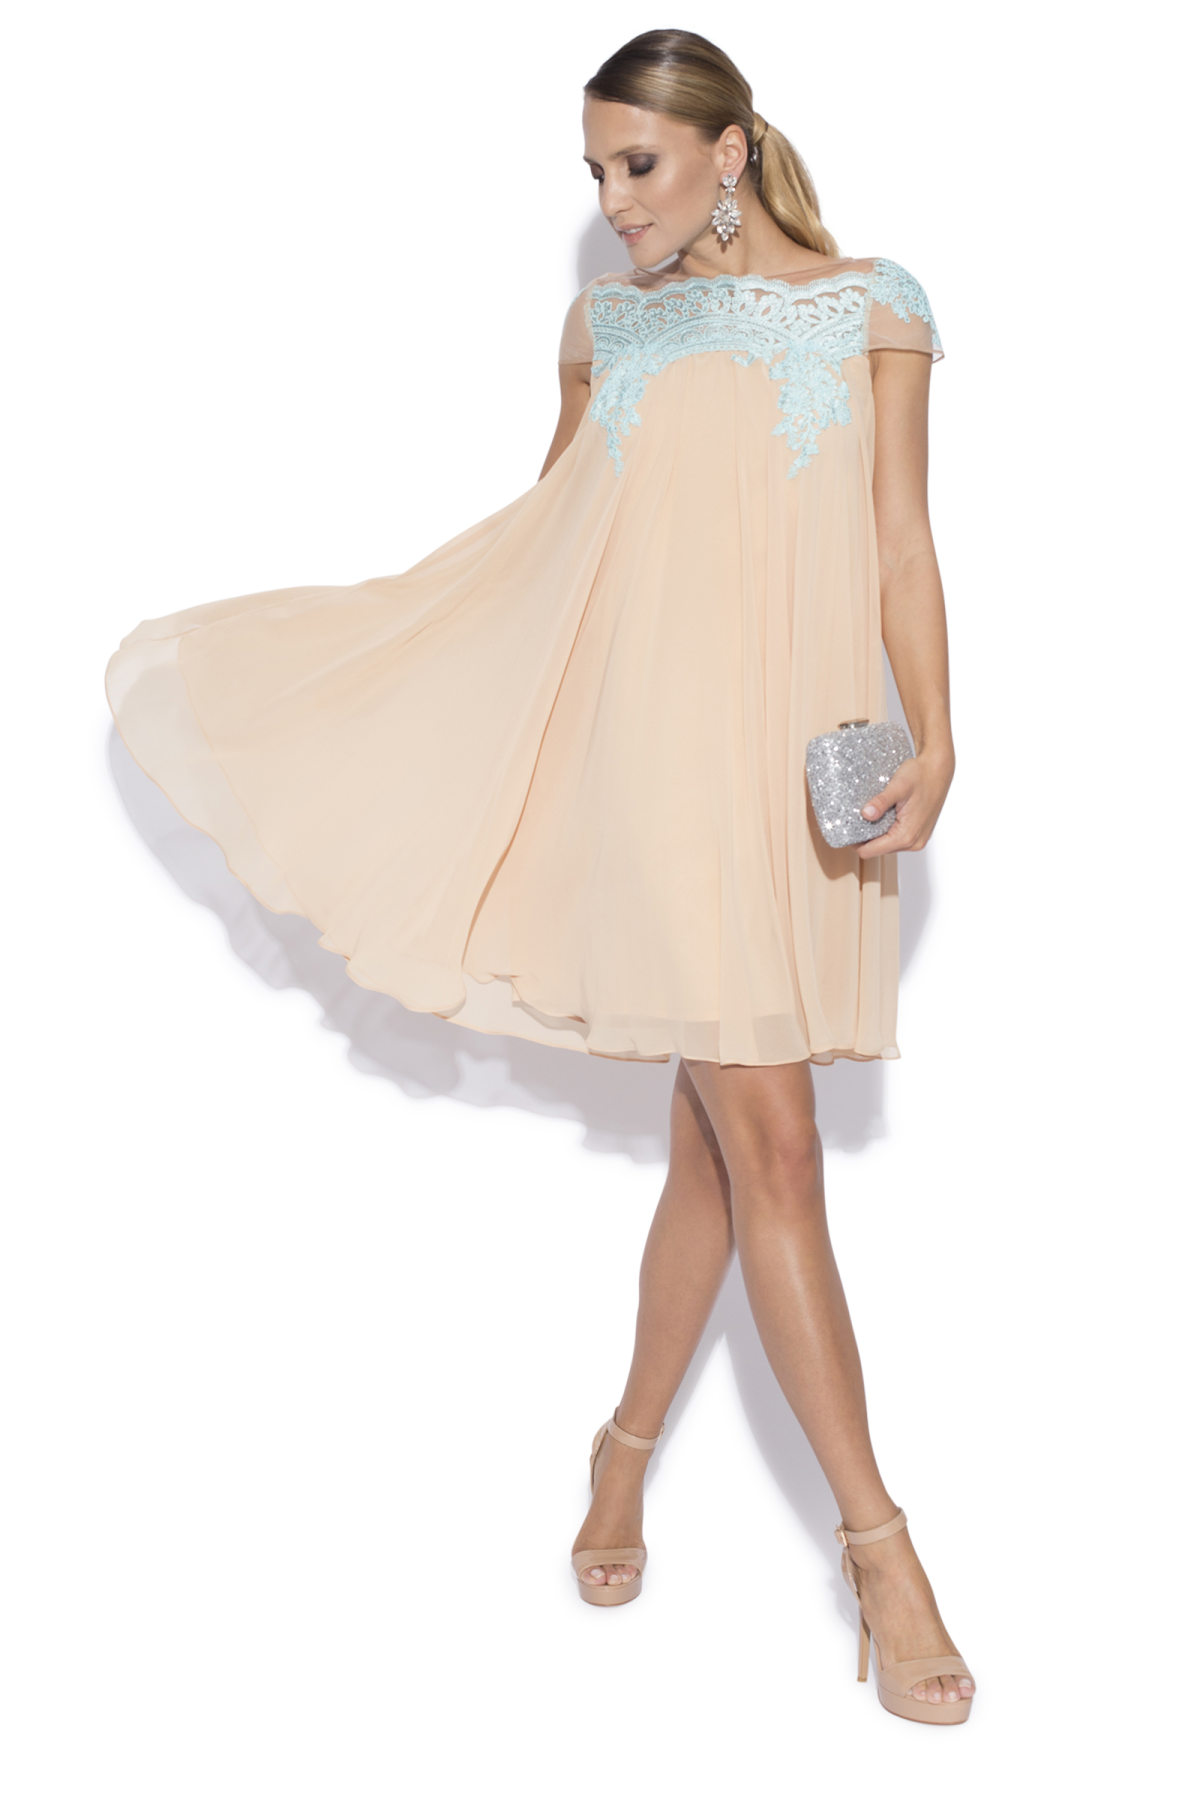 Babydoll evening dress with lace ...